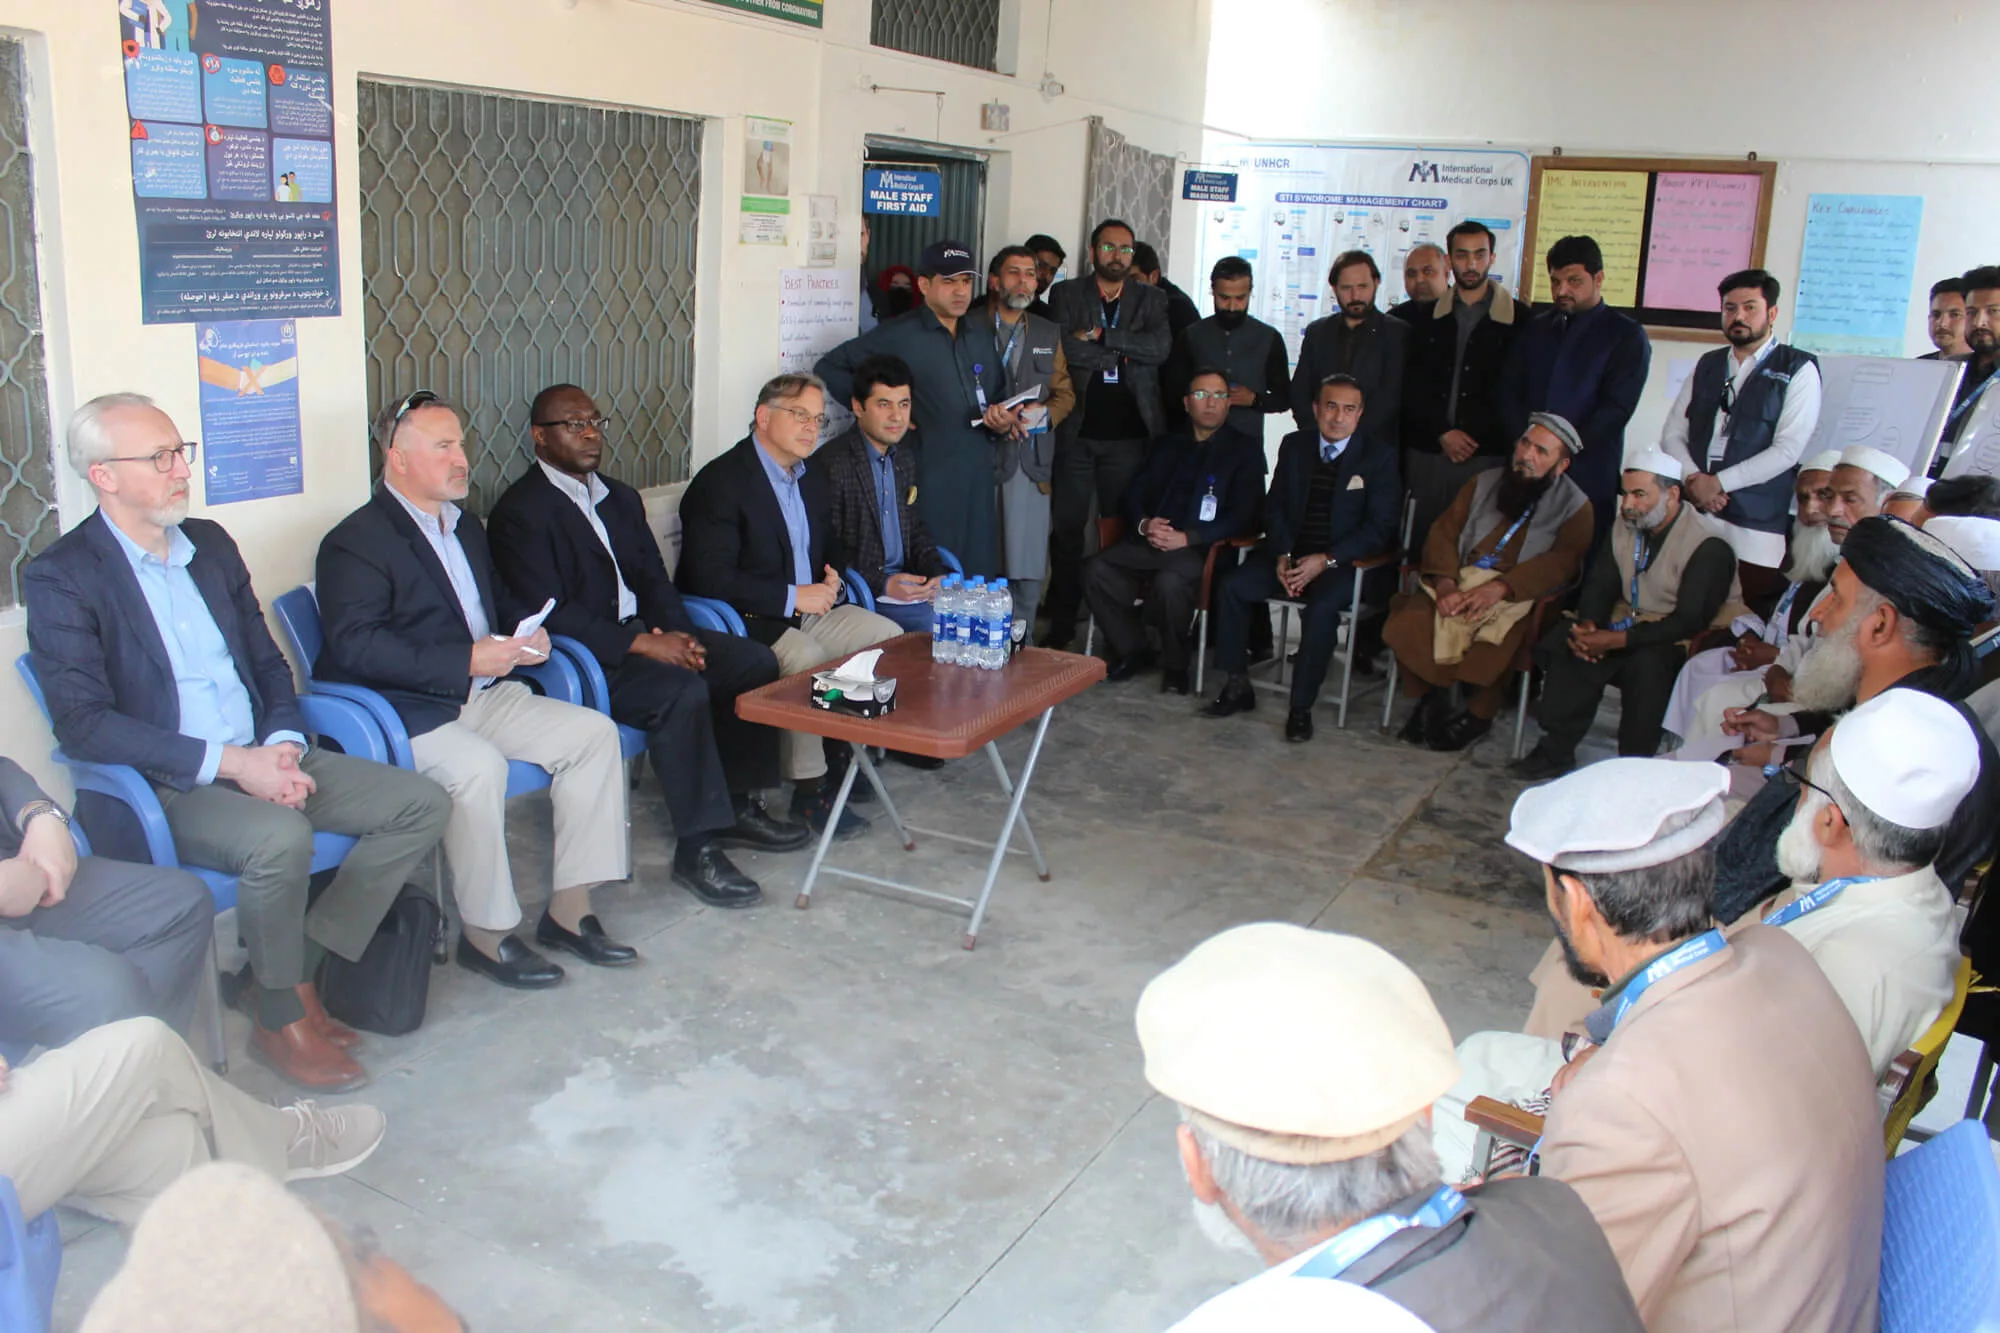 Ambassador Blome meets with International Medical Corps staff members and community leaders.